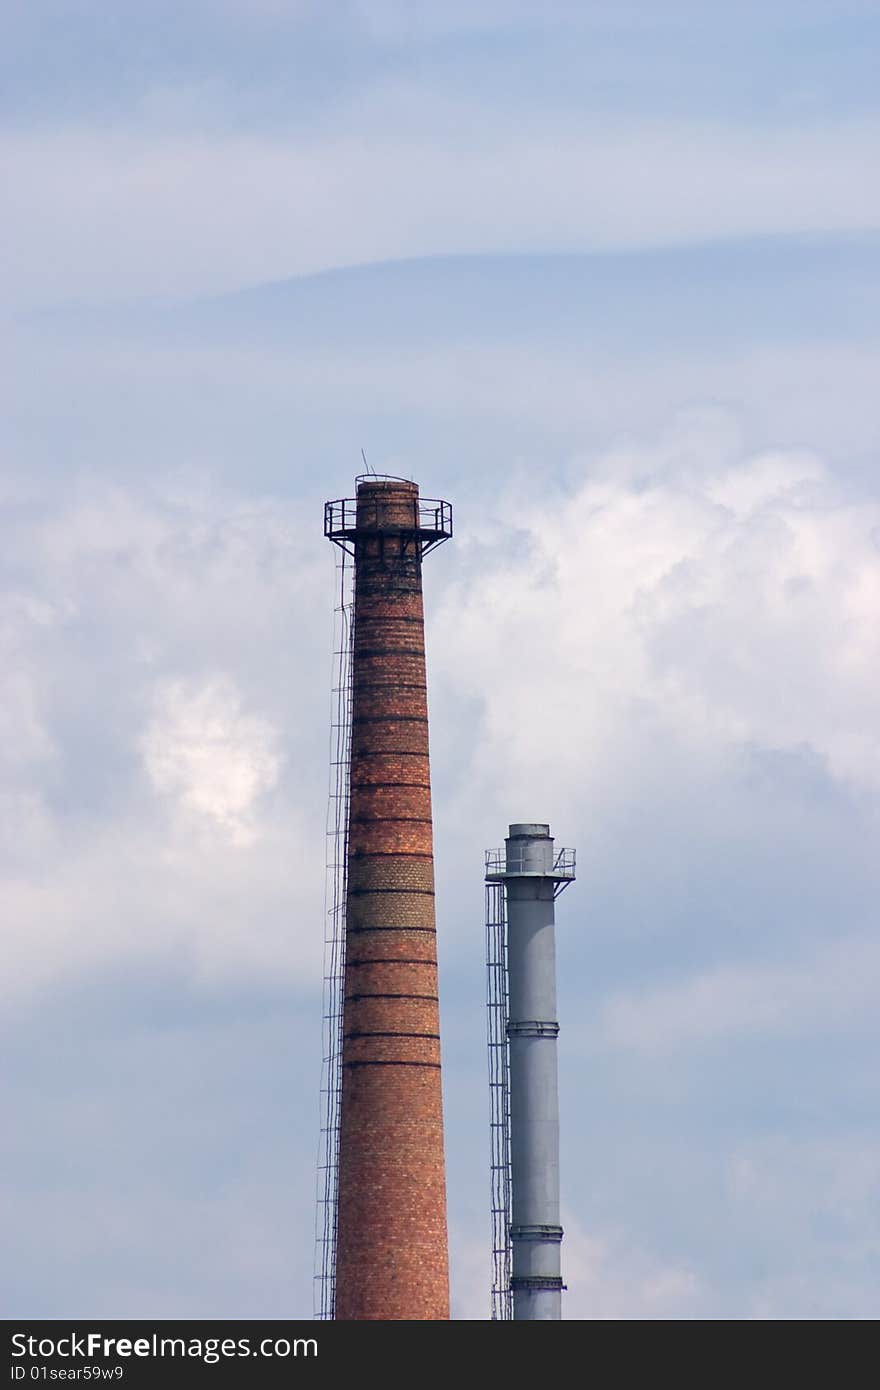 Big industrial chimneys polluting our environment, with blue sky in background